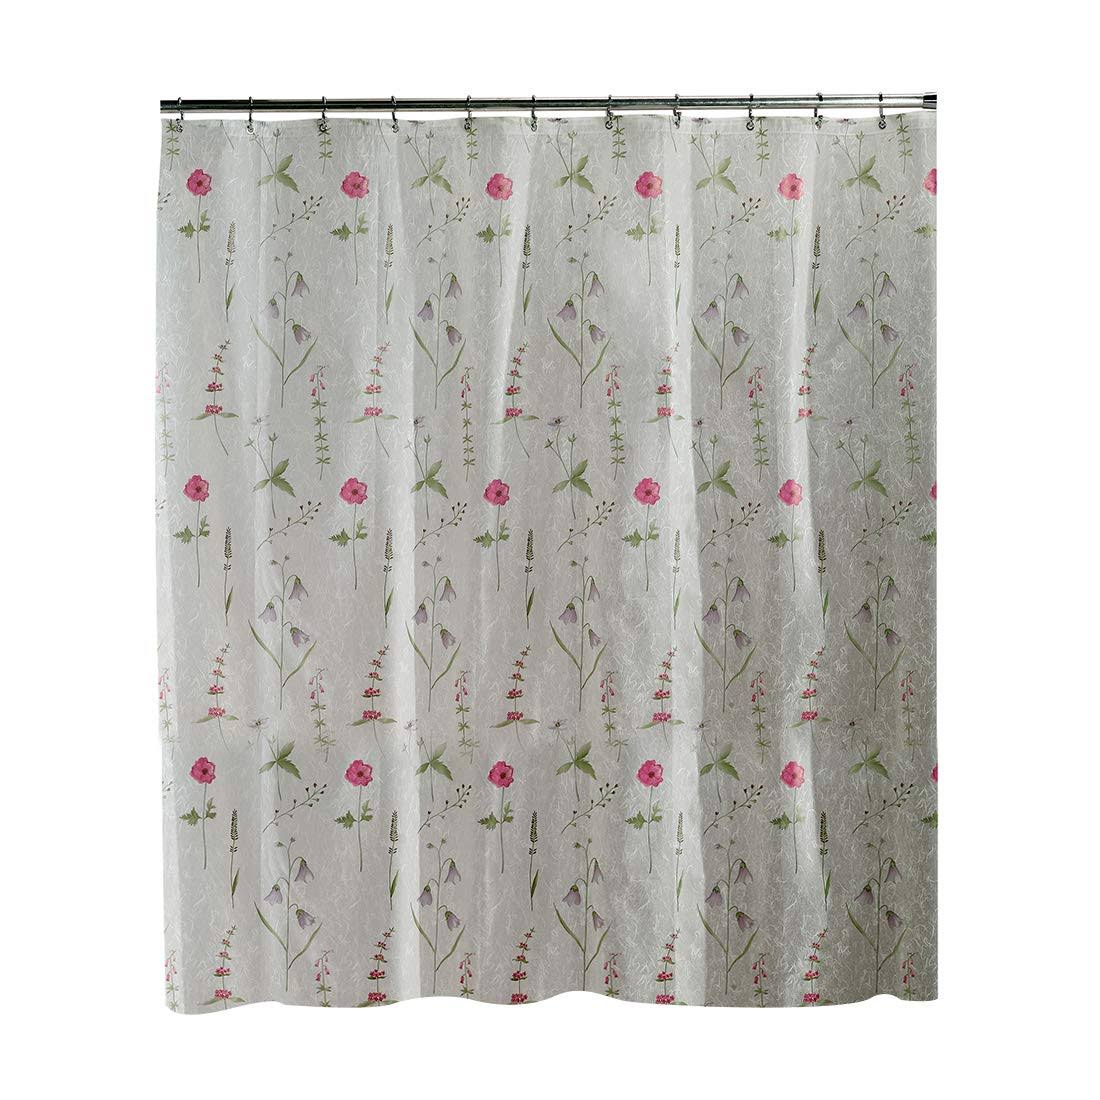 Ex Cell By Appointment Poppies Vinyl Shower Curtain - 70" x 72"